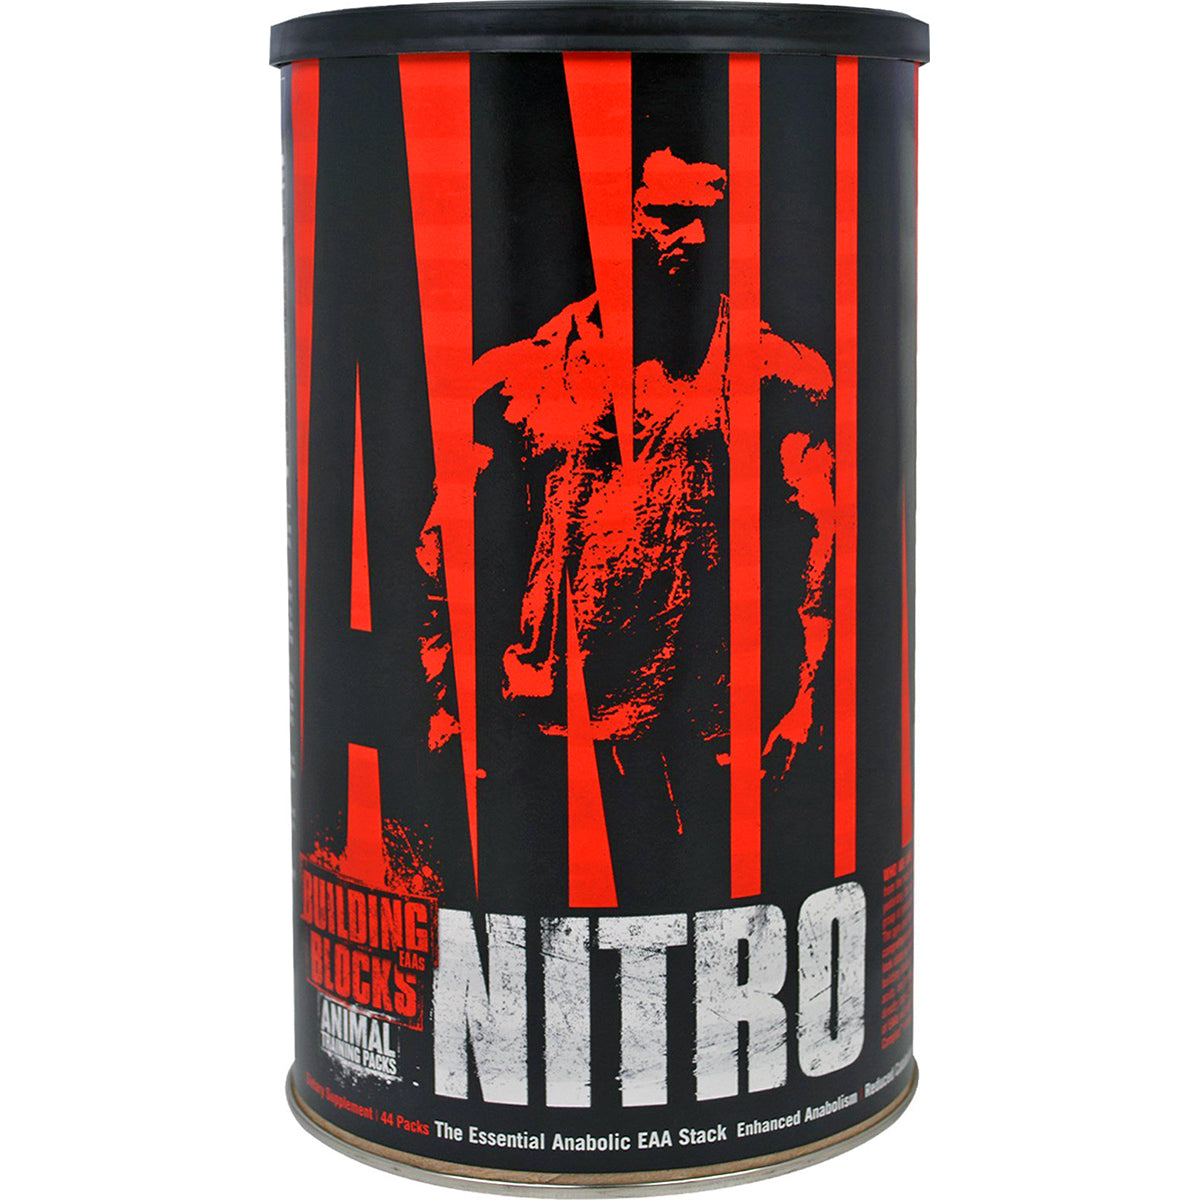 Universal Nutrition Animal Nitro - 44 pack - Anabolic EAA Stack Muscle Builder Universal Nutrition